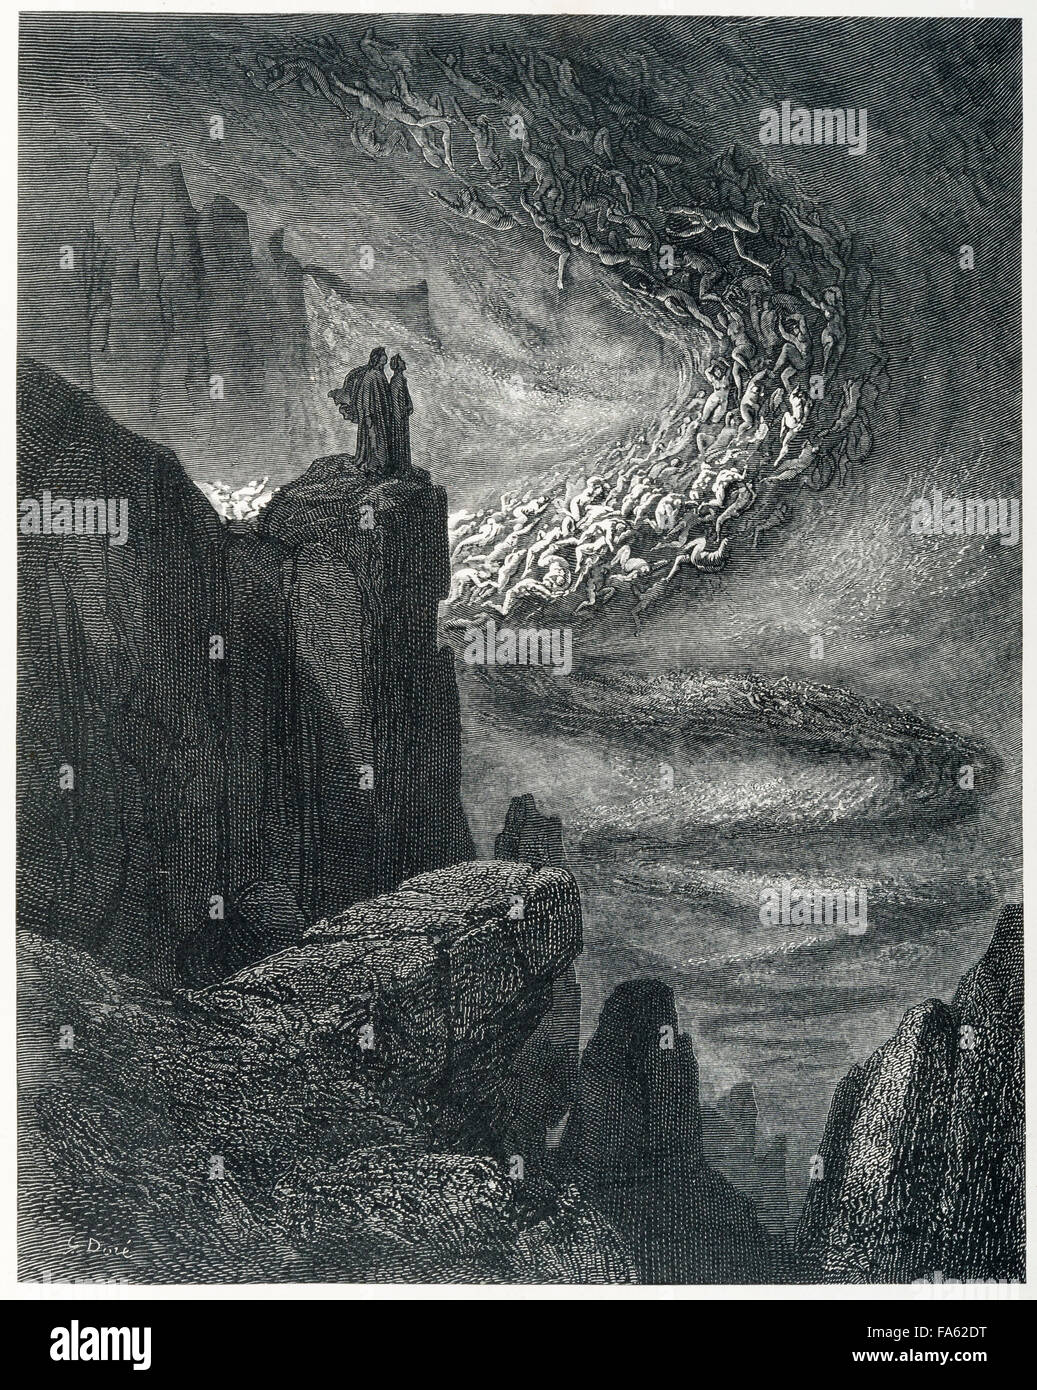 l'Inferno (The Vision of Hell) by the 13c Italian poet Dante Alighieri, illustrated by the 19c French artist Gustave Doré. The Second Circle of Hell, where the lustful are punished by being blown about in a violent storm forever. (Canto V, lines 32-33) Stock Photo